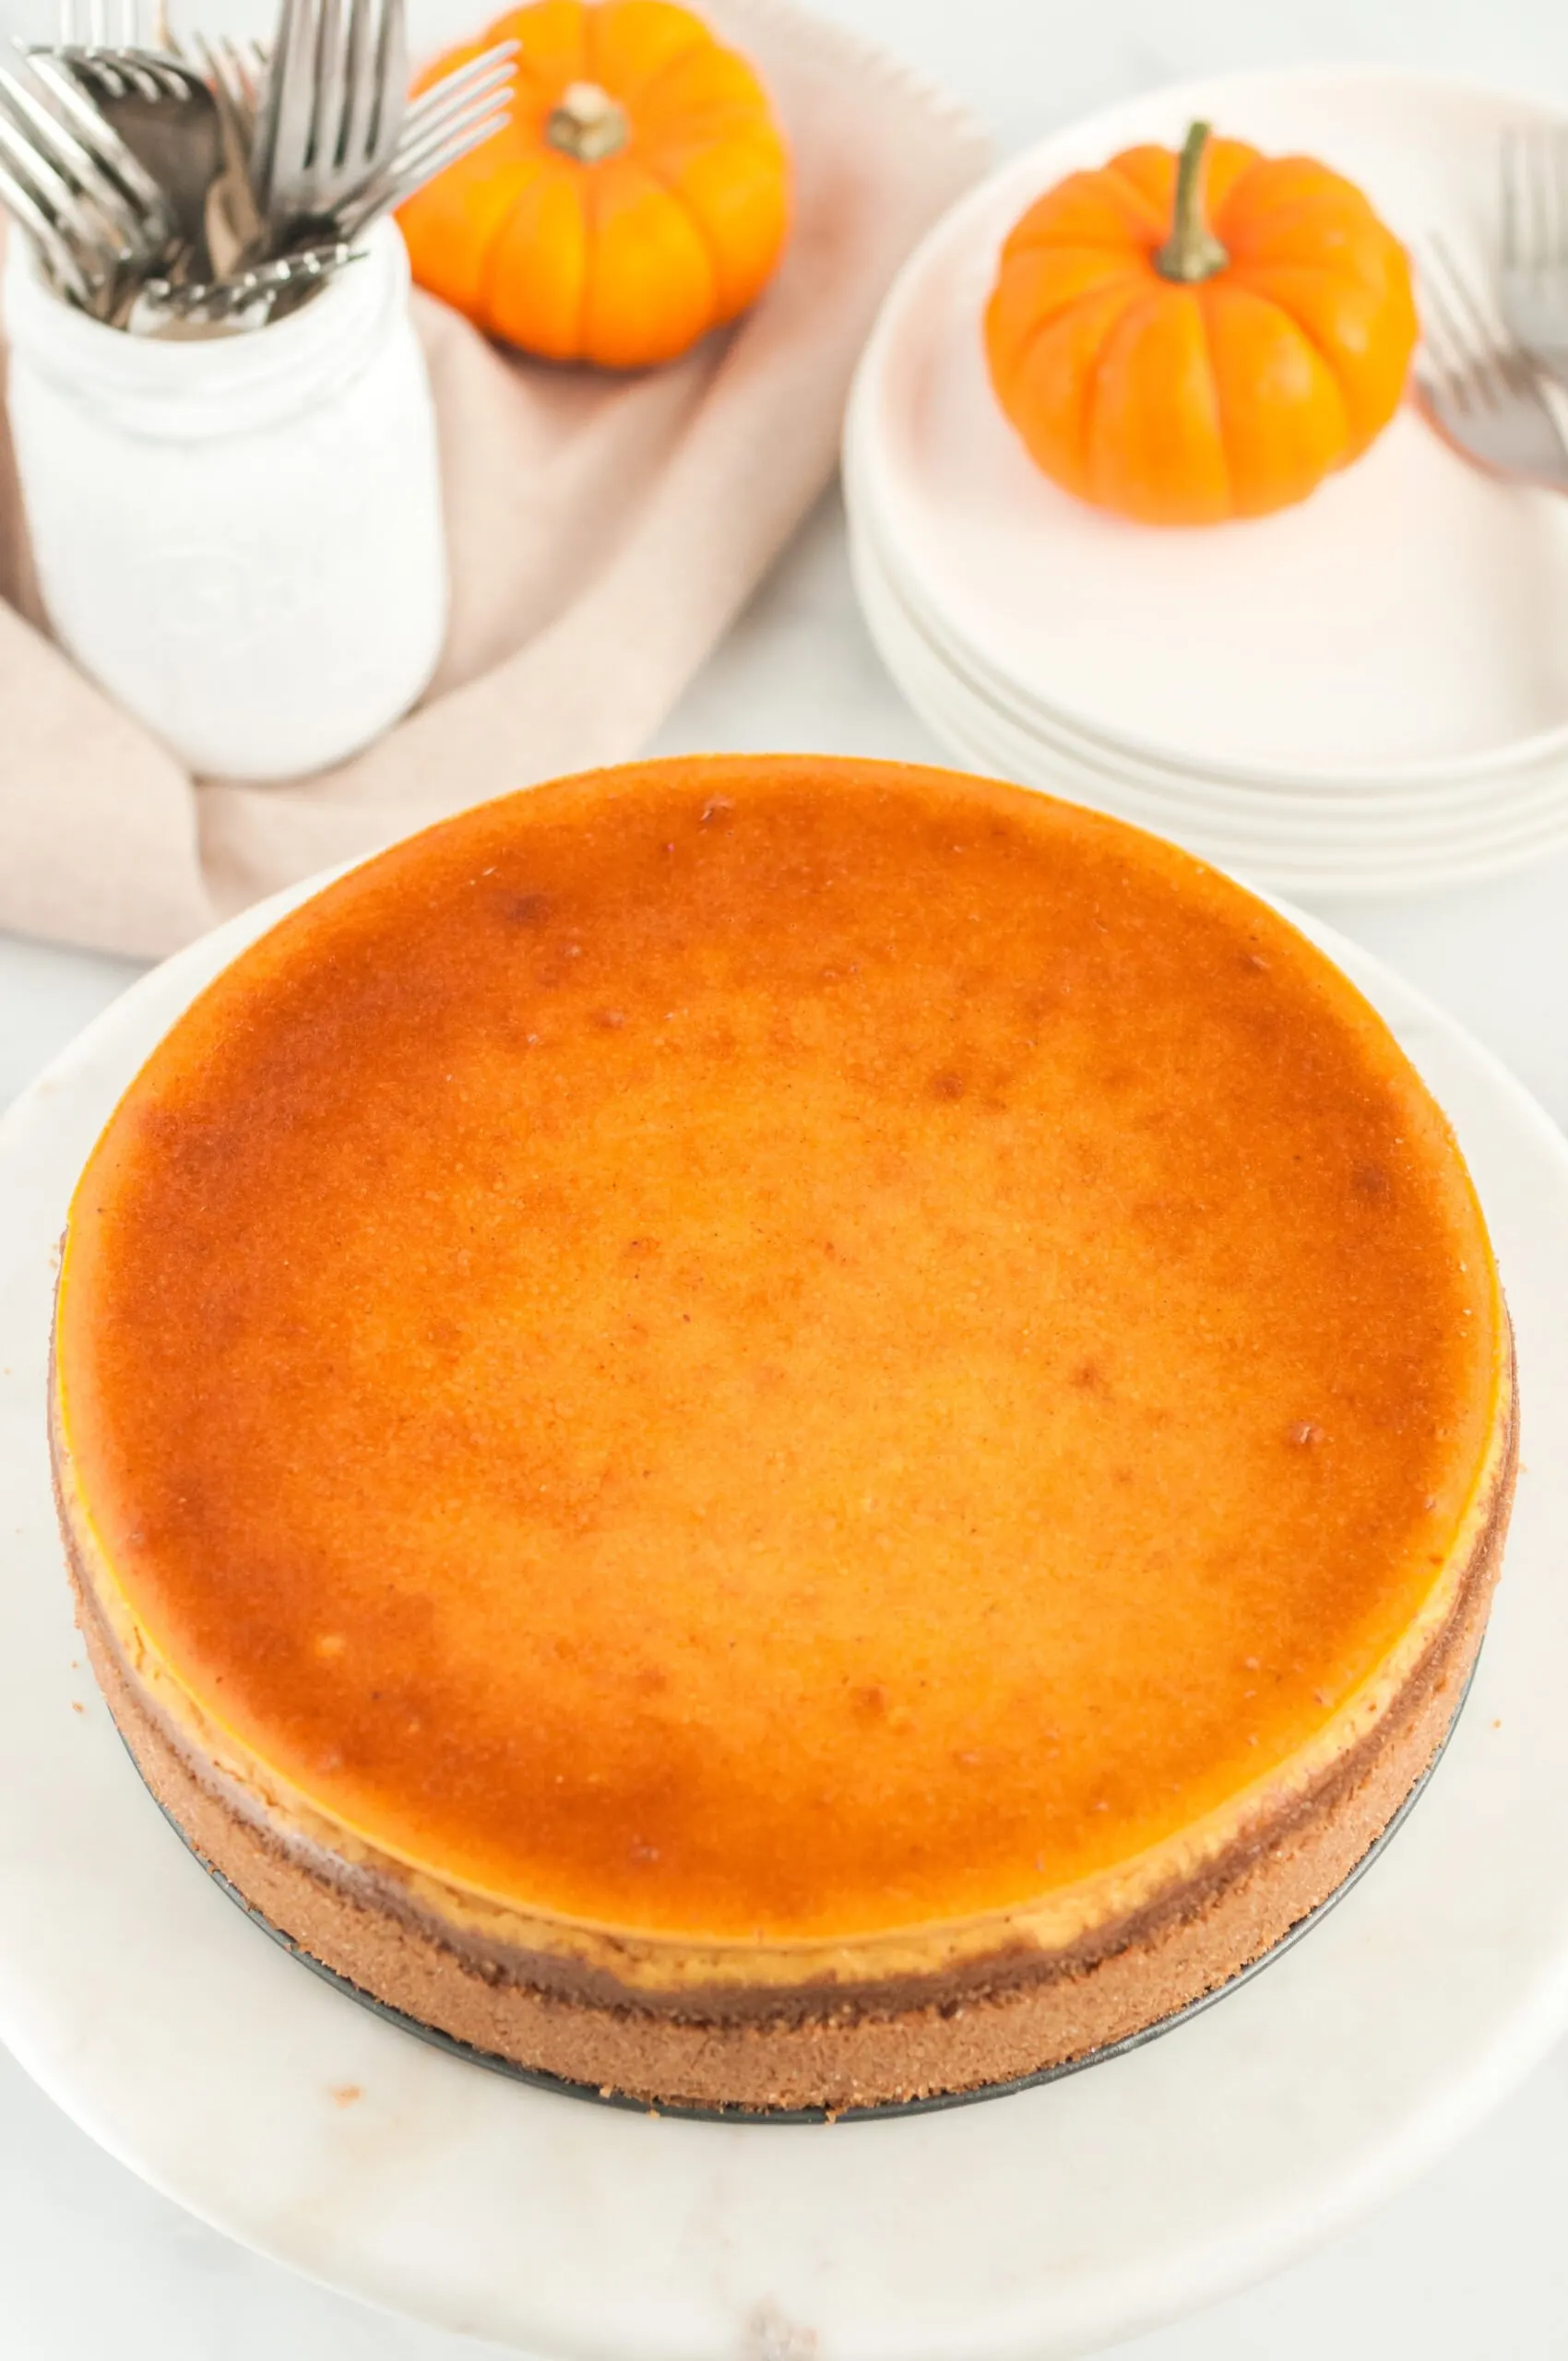 freshly baked pumpkin cheesecake for the holiday season. Lightly golden top.